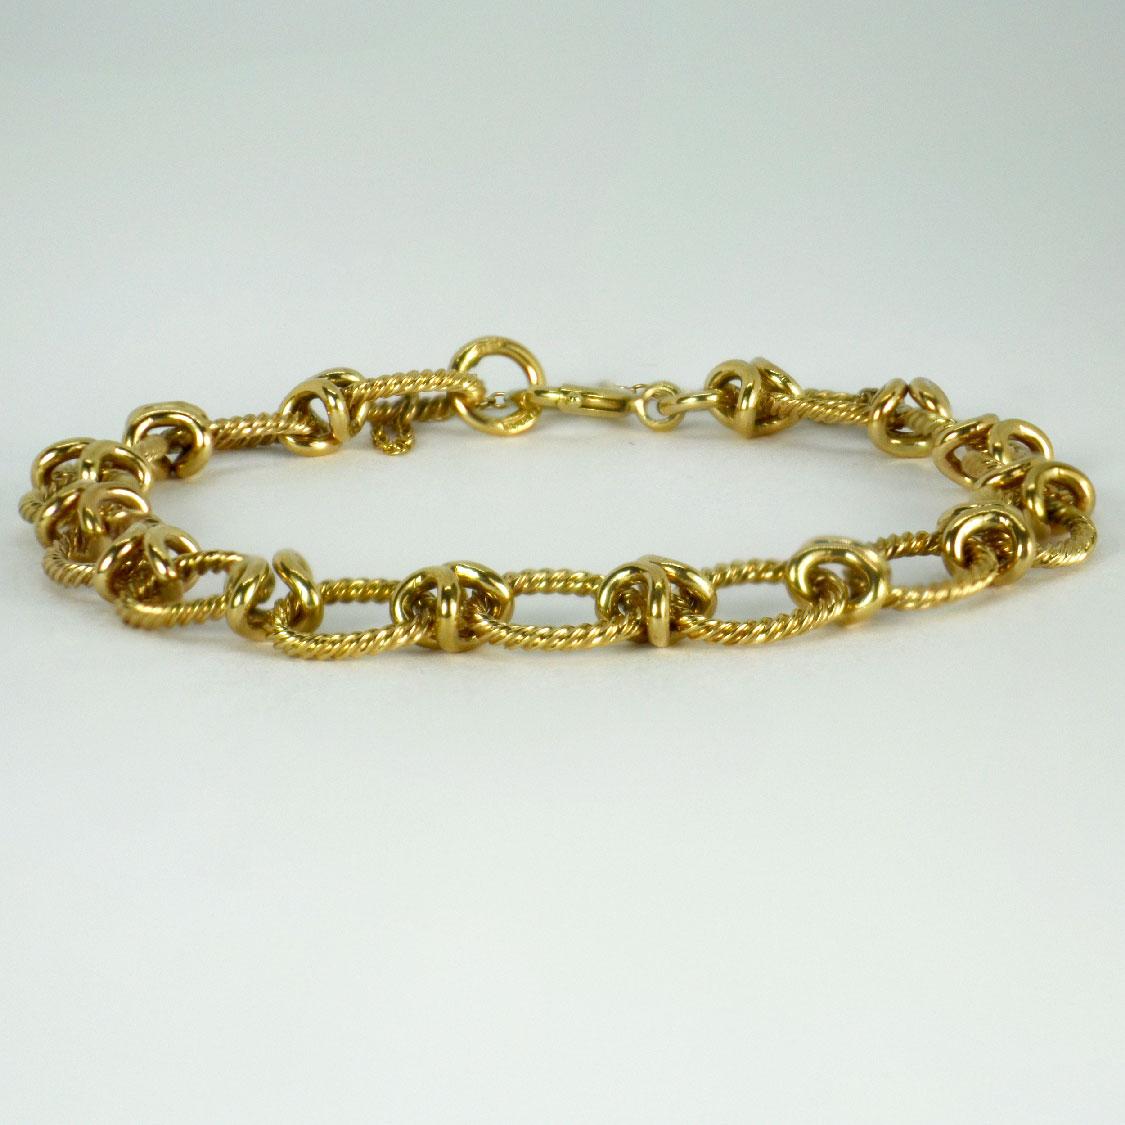 A 9 karat (9K) yellow gold fancy link bracelet designed with twisted oval links. Hallmarked for Birmingham, 9 karat gold, 1963 with unknown makers mark JG&S. 7.25” long.

Dimensions: 18.5 x 0.8 cm
Weight: 13.02 grams
